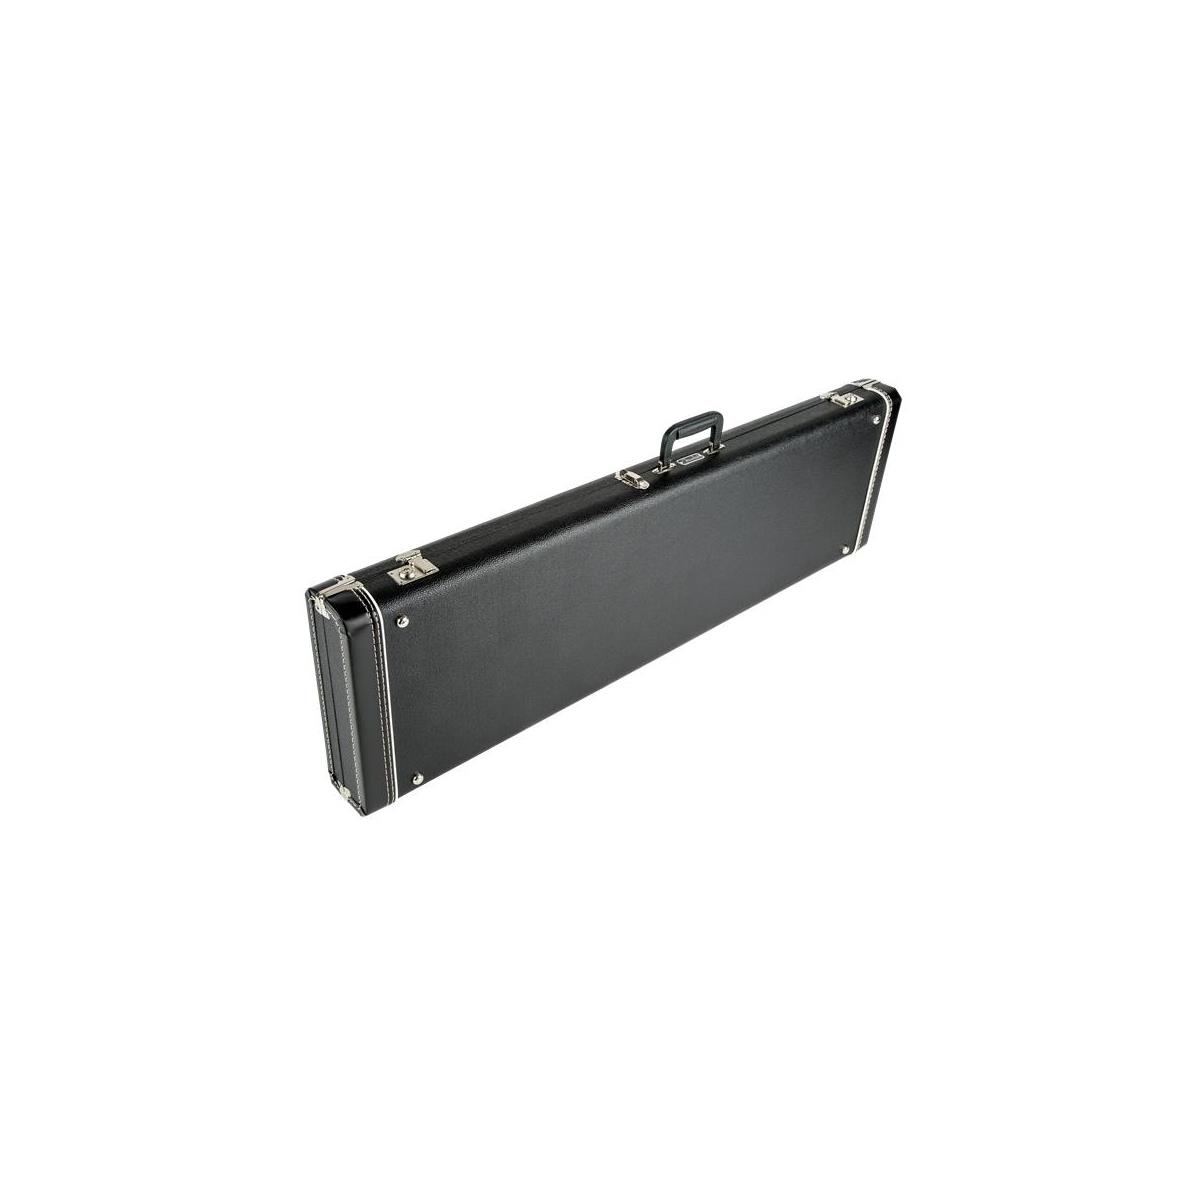 Image of Fender Short Scale Standard Black Bass Multi-Fit Case with Acrylic Interior